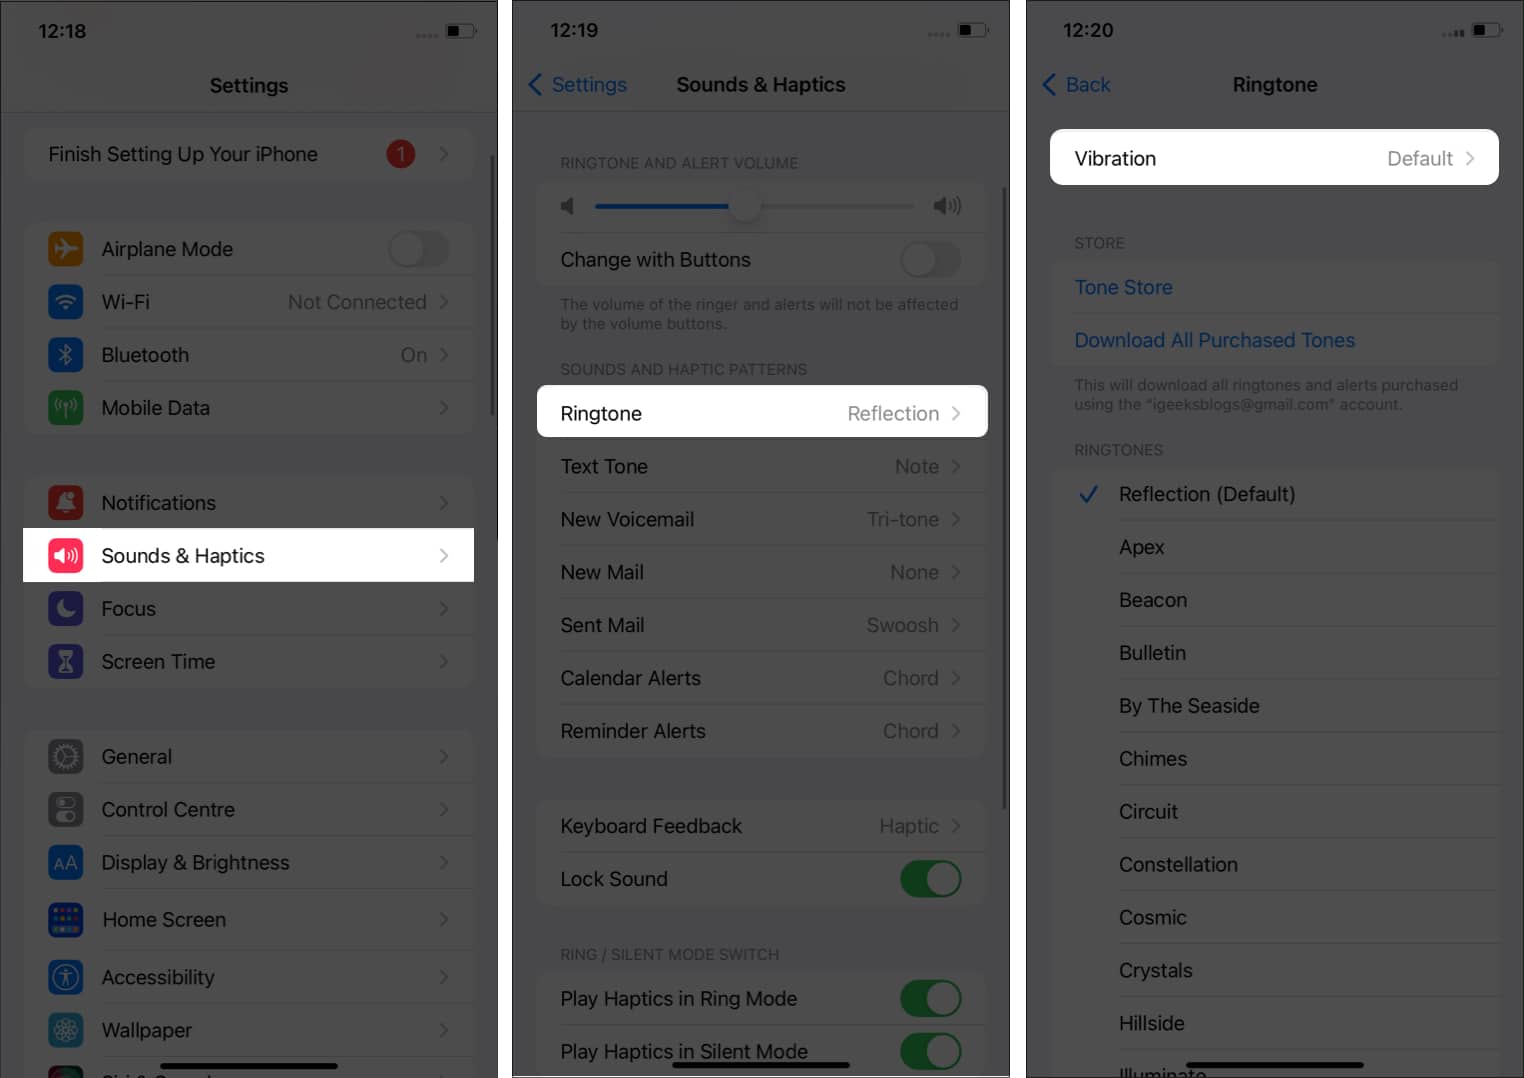 Select Ringtone and then Vibration in Settings on iPhone